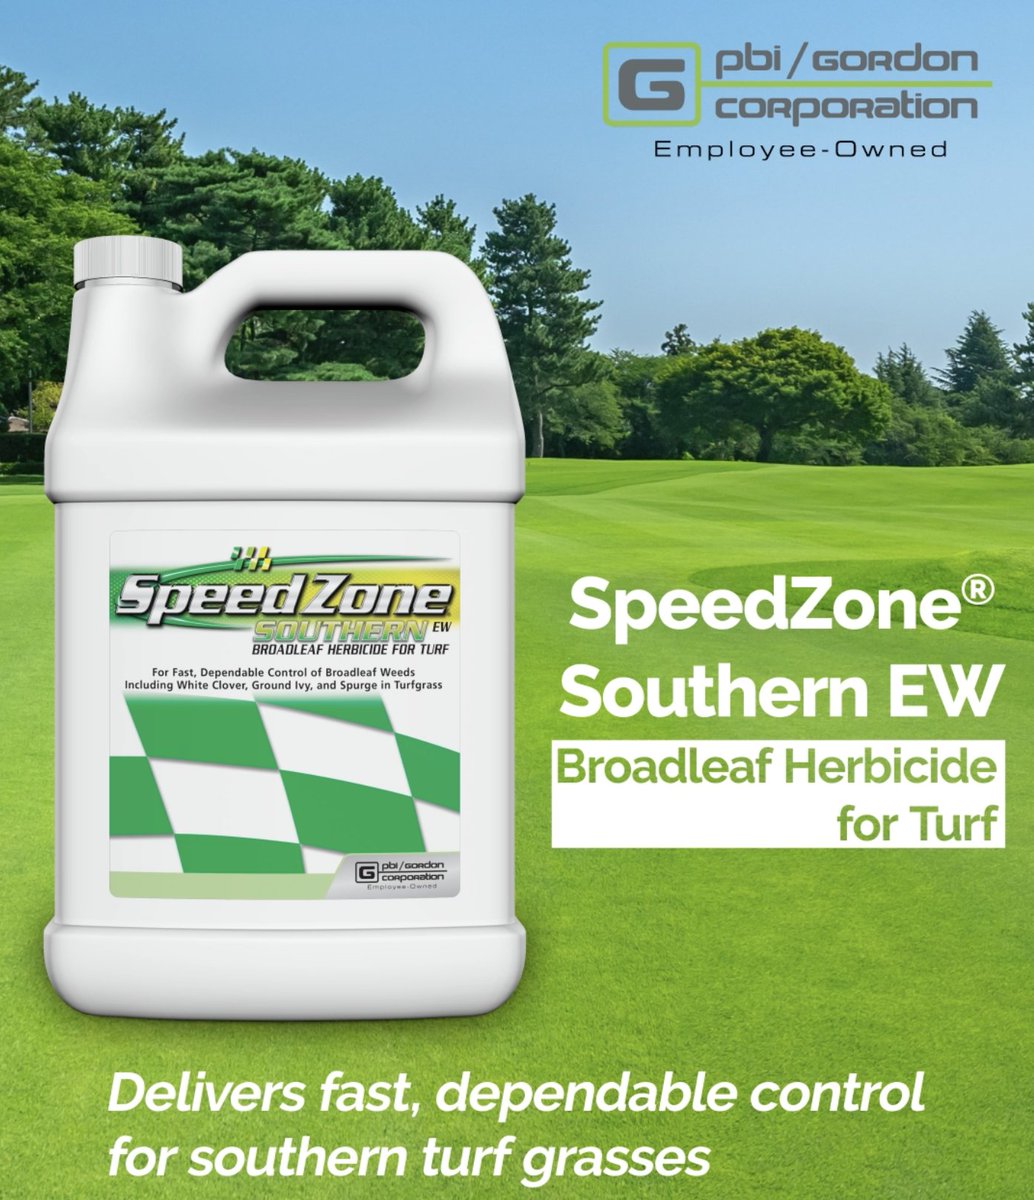 SpeedZone® Southern EW Broadleaf Herbicide for Turf delievers fast, dependable control for southern turfgrasses. Say goodbye to the following pesky weeds. #PBIGordonTurf  pbigordonturf.com/products/herbi…
✔️ Dollarweed
✔️ Creeping Beggarweed
✔️ Ground Ivy
✔️ Spurge